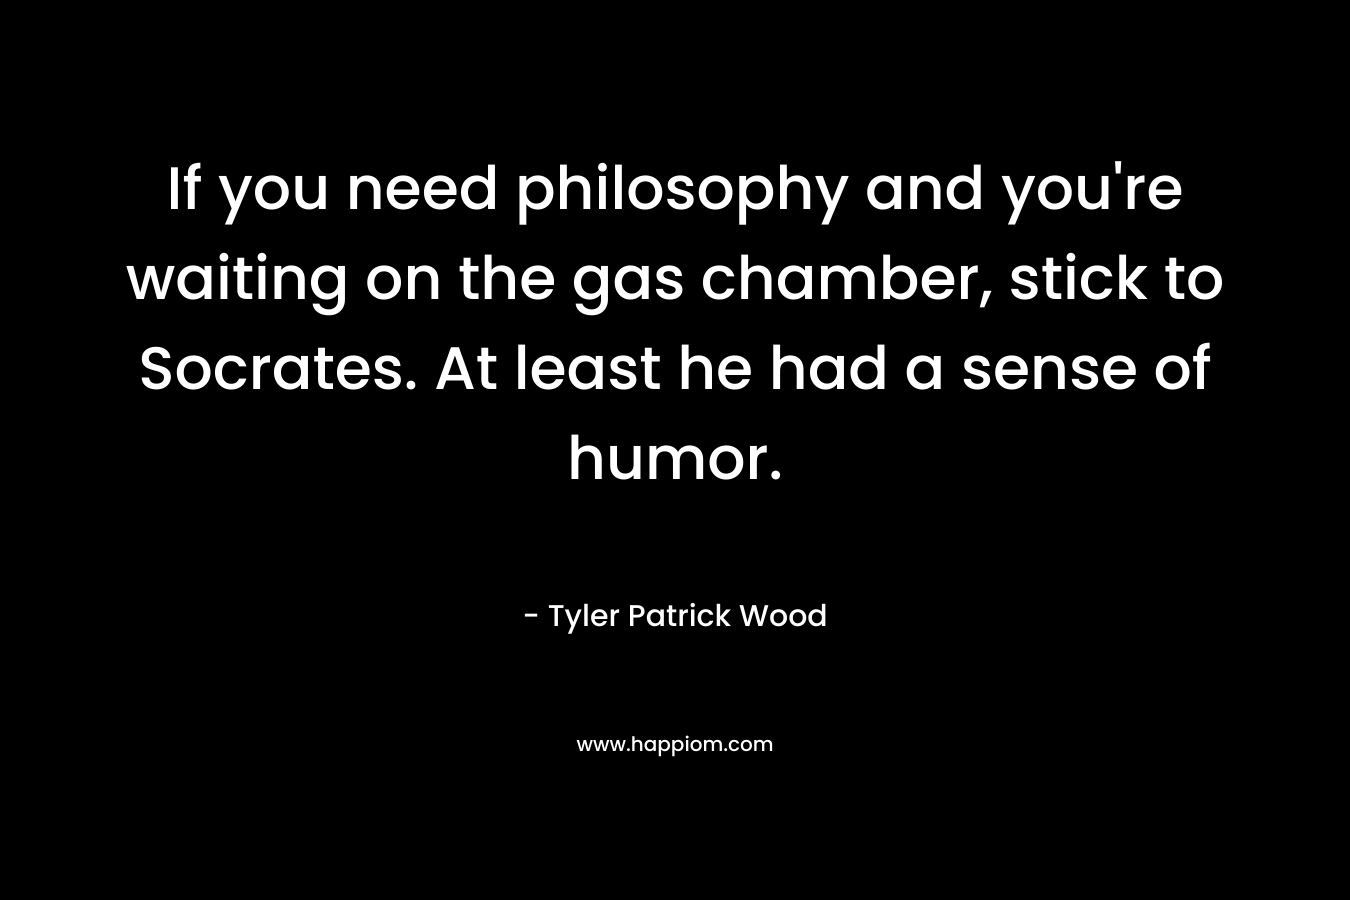 If you need philosophy and you’re waiting on the gas chamber, stick to Socrates. At least he had a sense of humor. – Tyler Patrick Wood